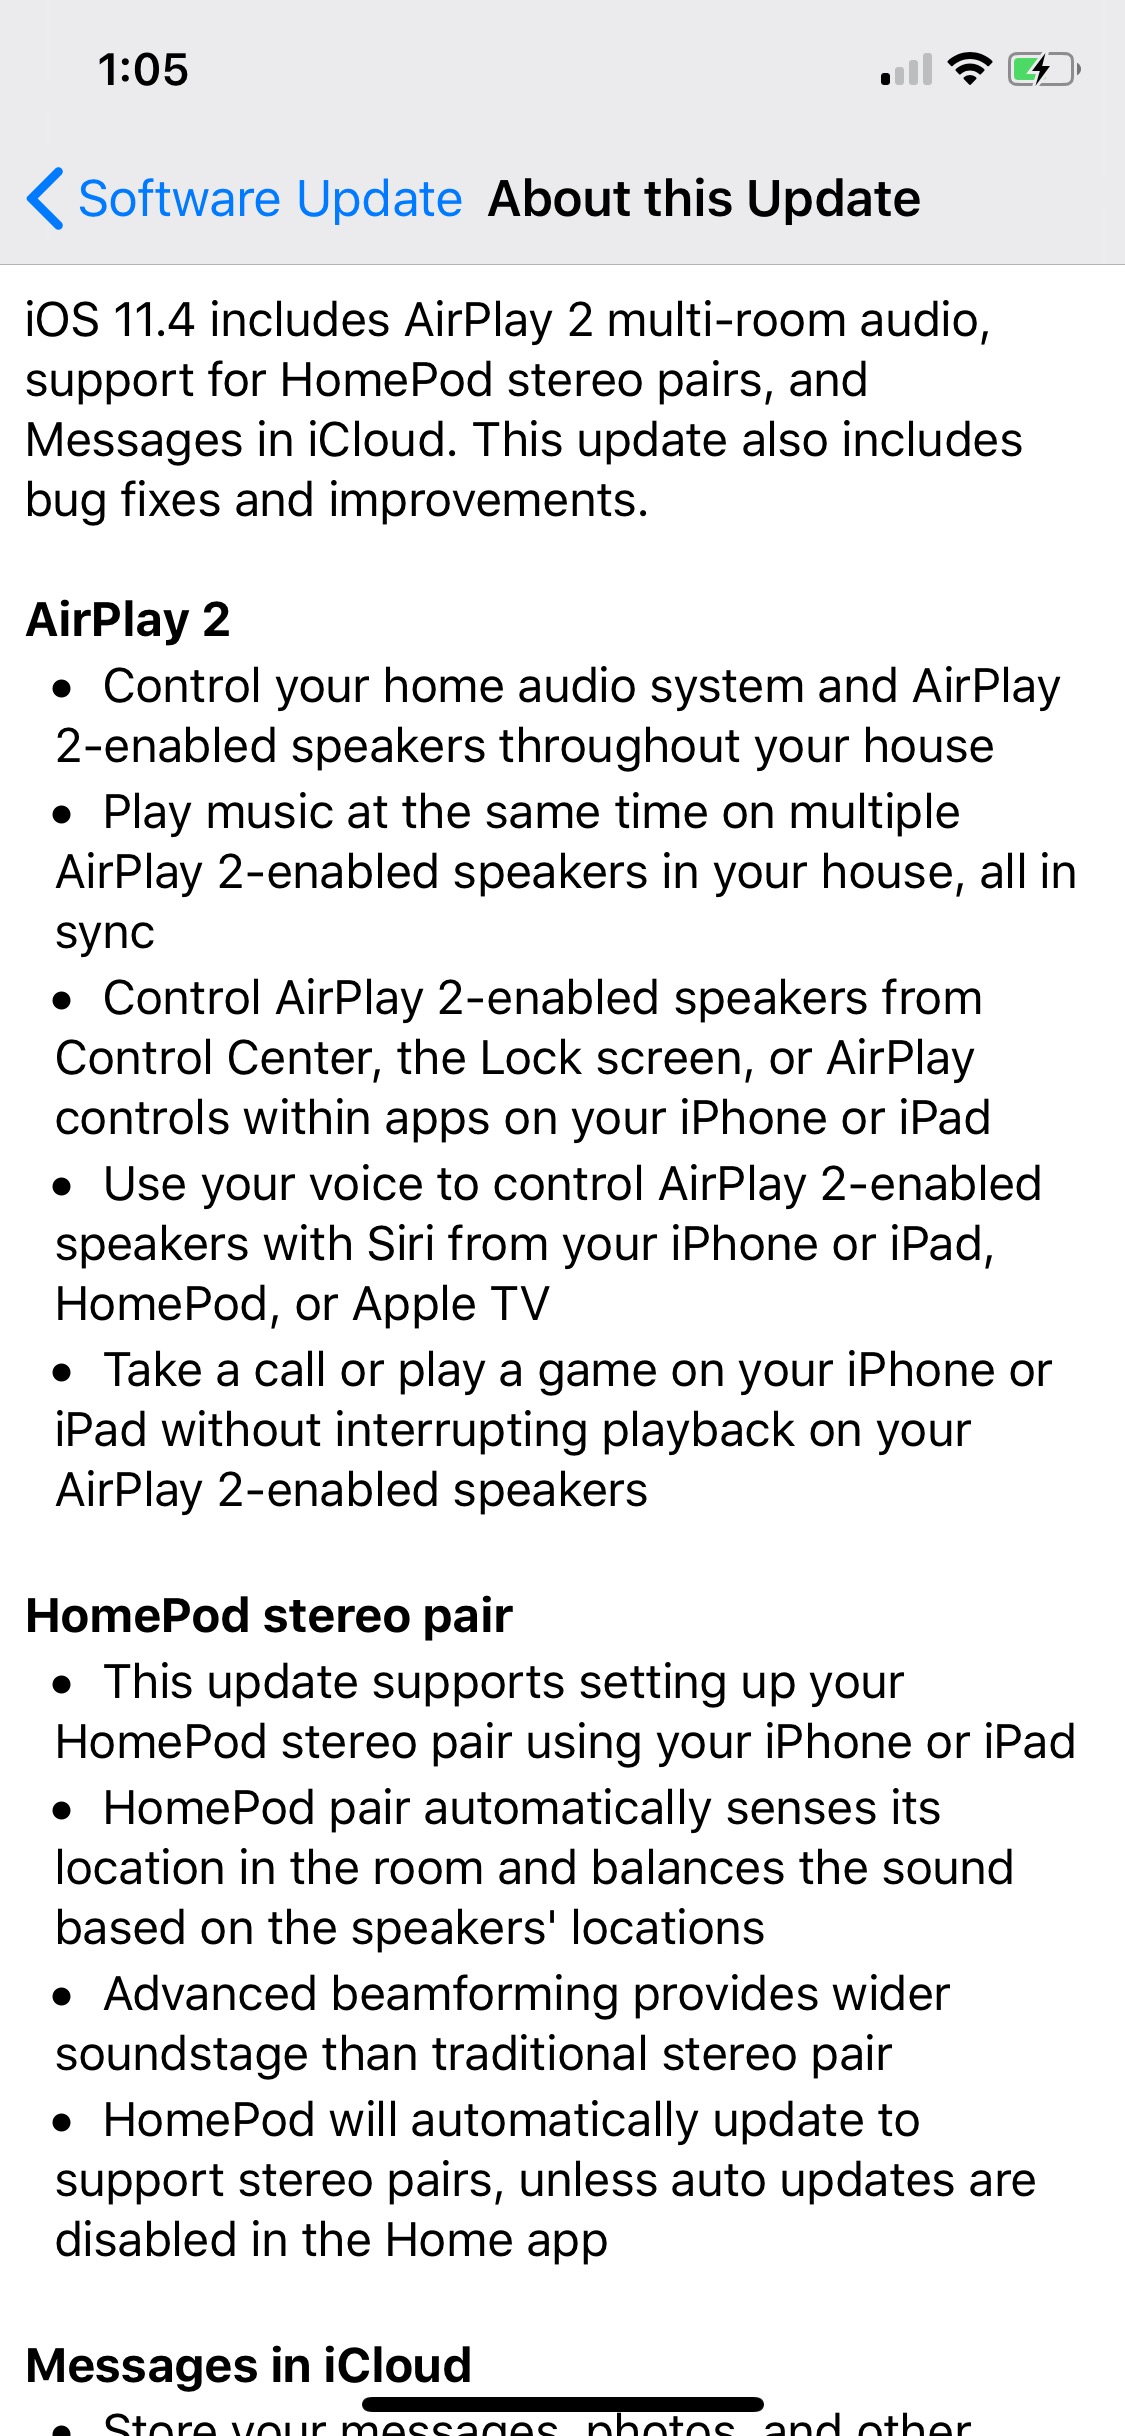 Apple Releases iOS 11.4 With Messages in iCloud, AirPlay 2, HomePod Stereo Pairs [Download]